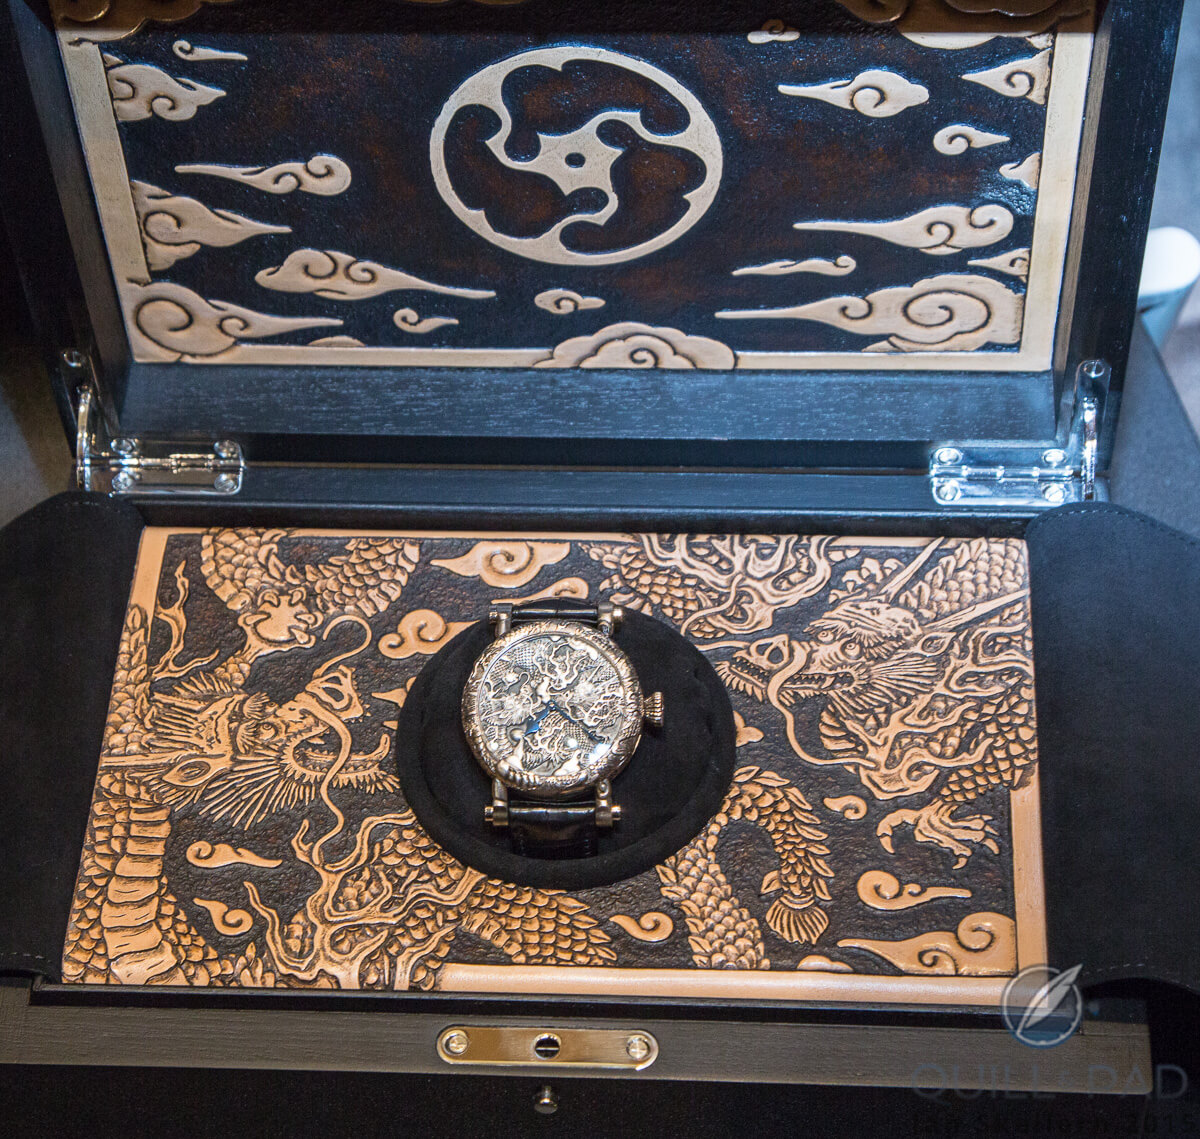 The Speake-Marin Kennin-ji-Temple Masters Project engraving encompasses the box as well as the watch